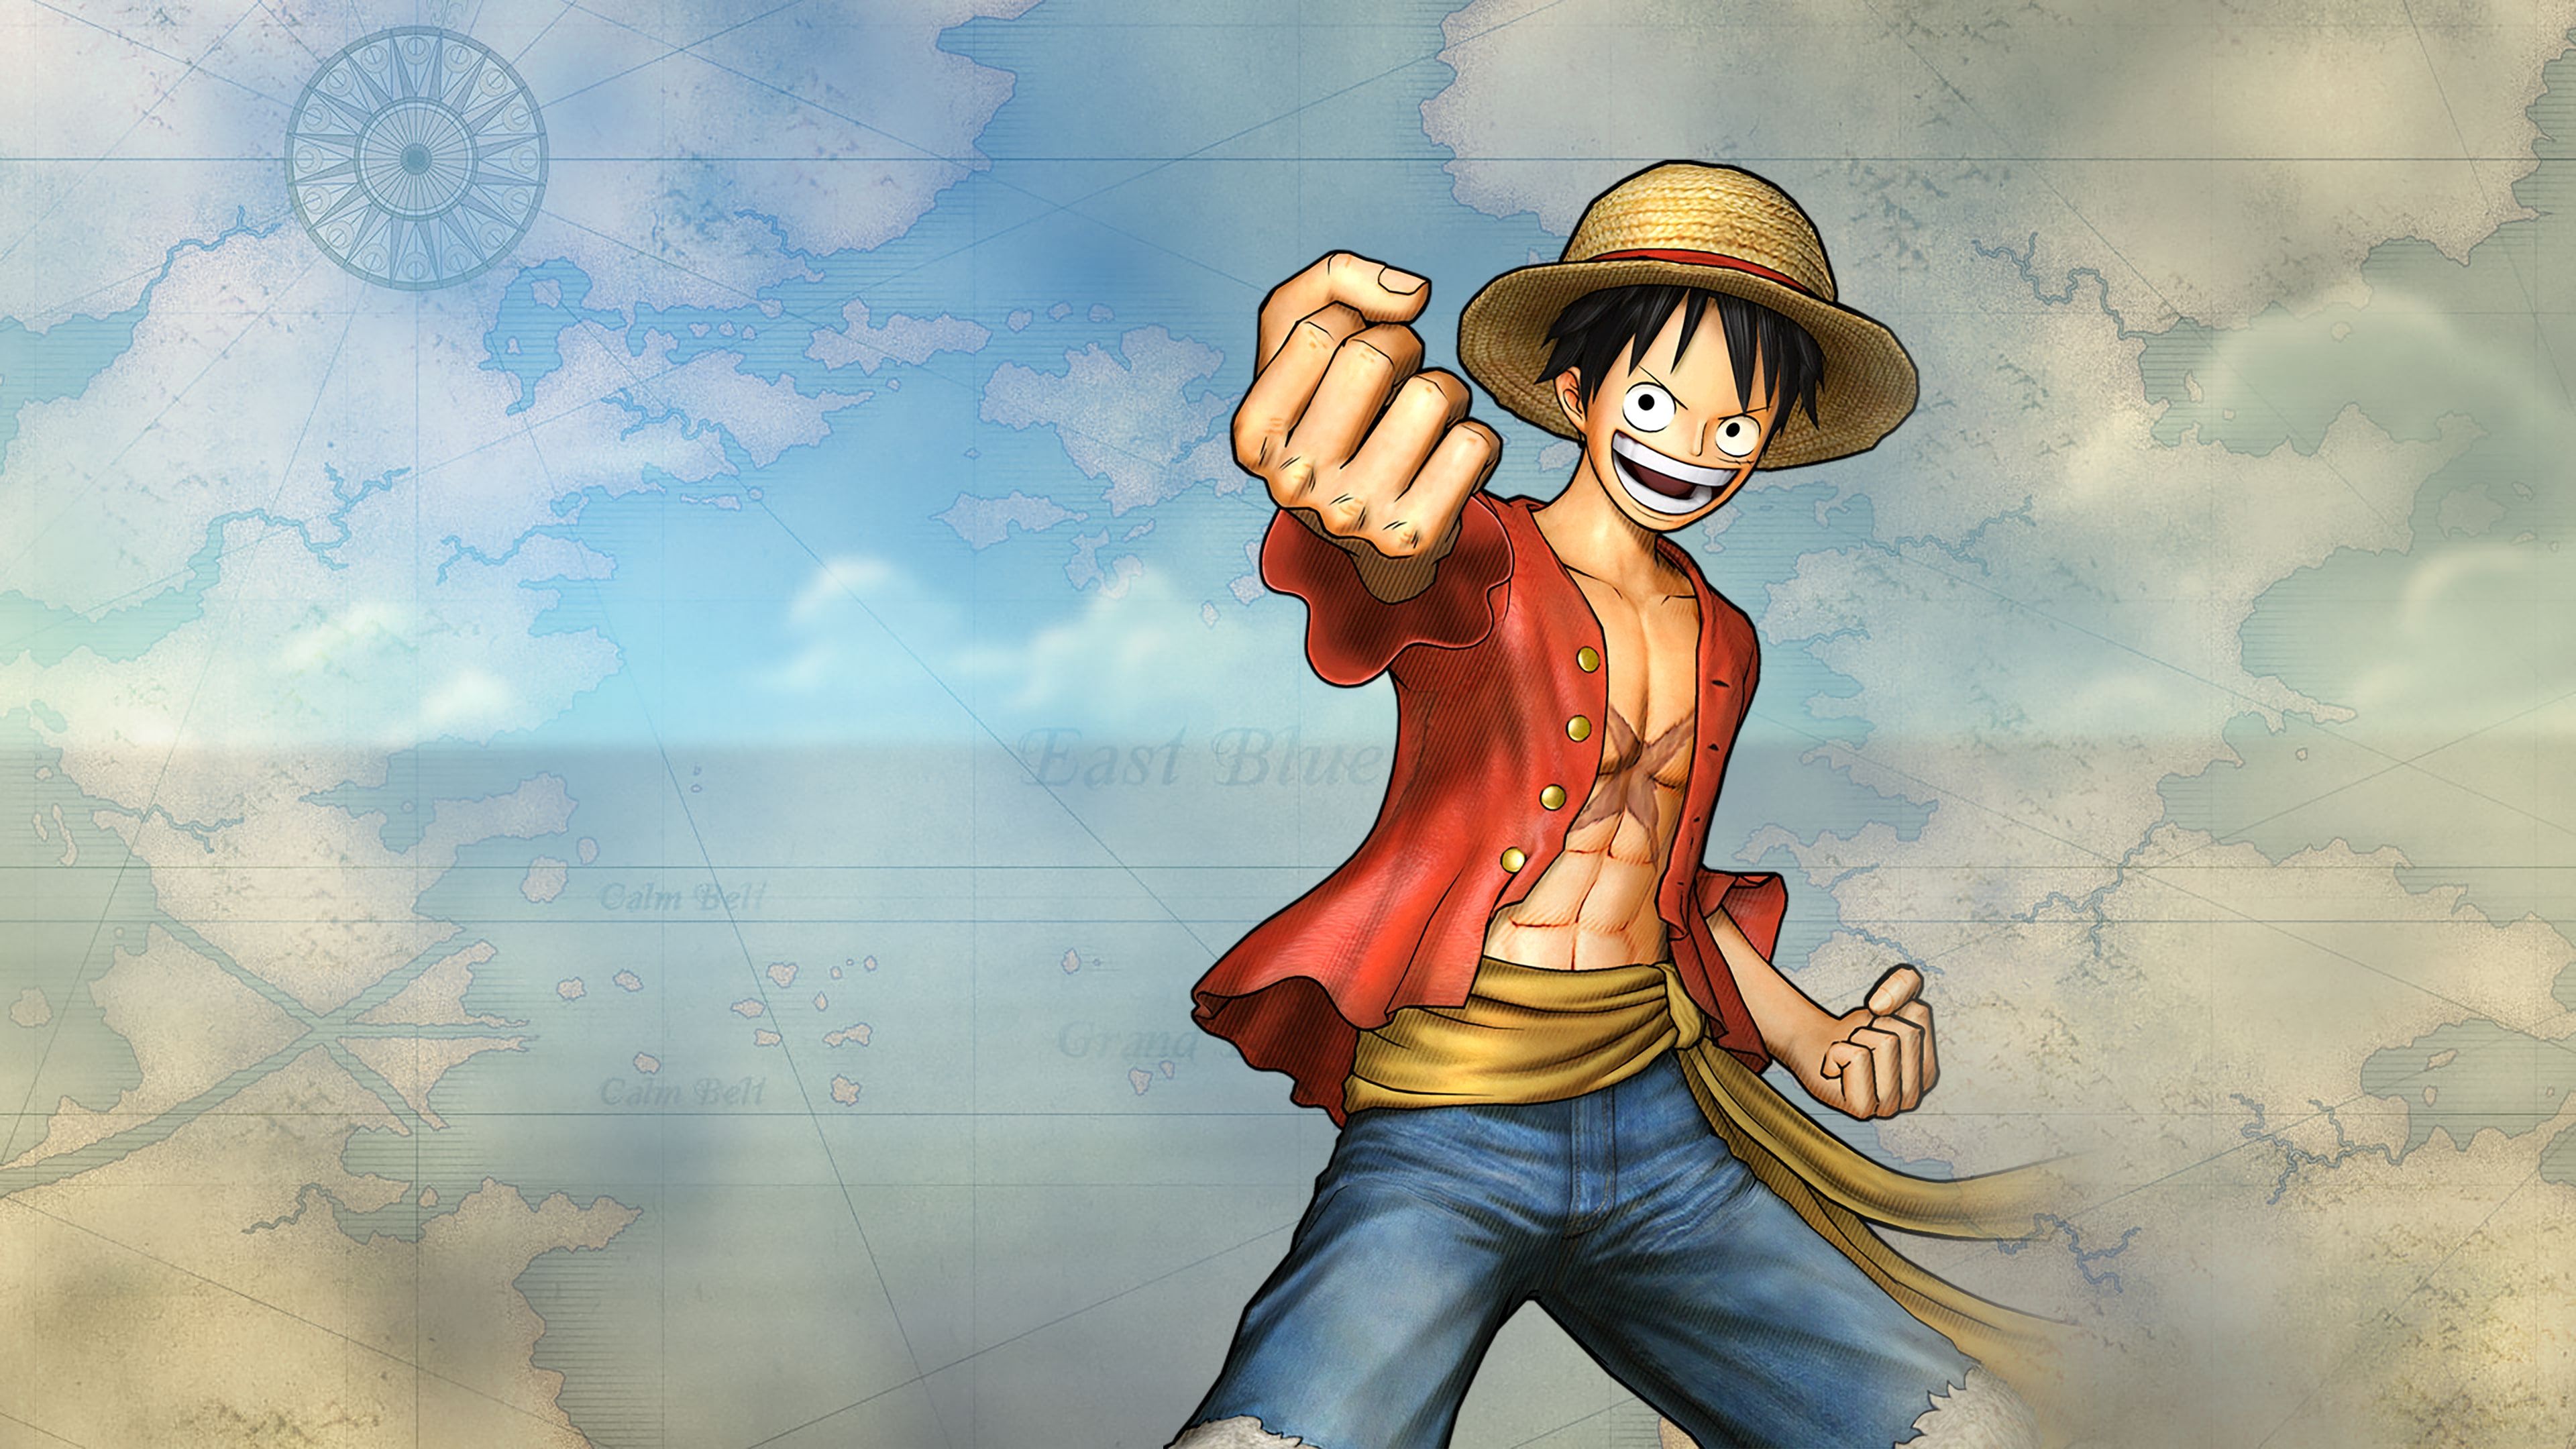 ONE PIECE: PIRATE WARRIORS 3 cover image